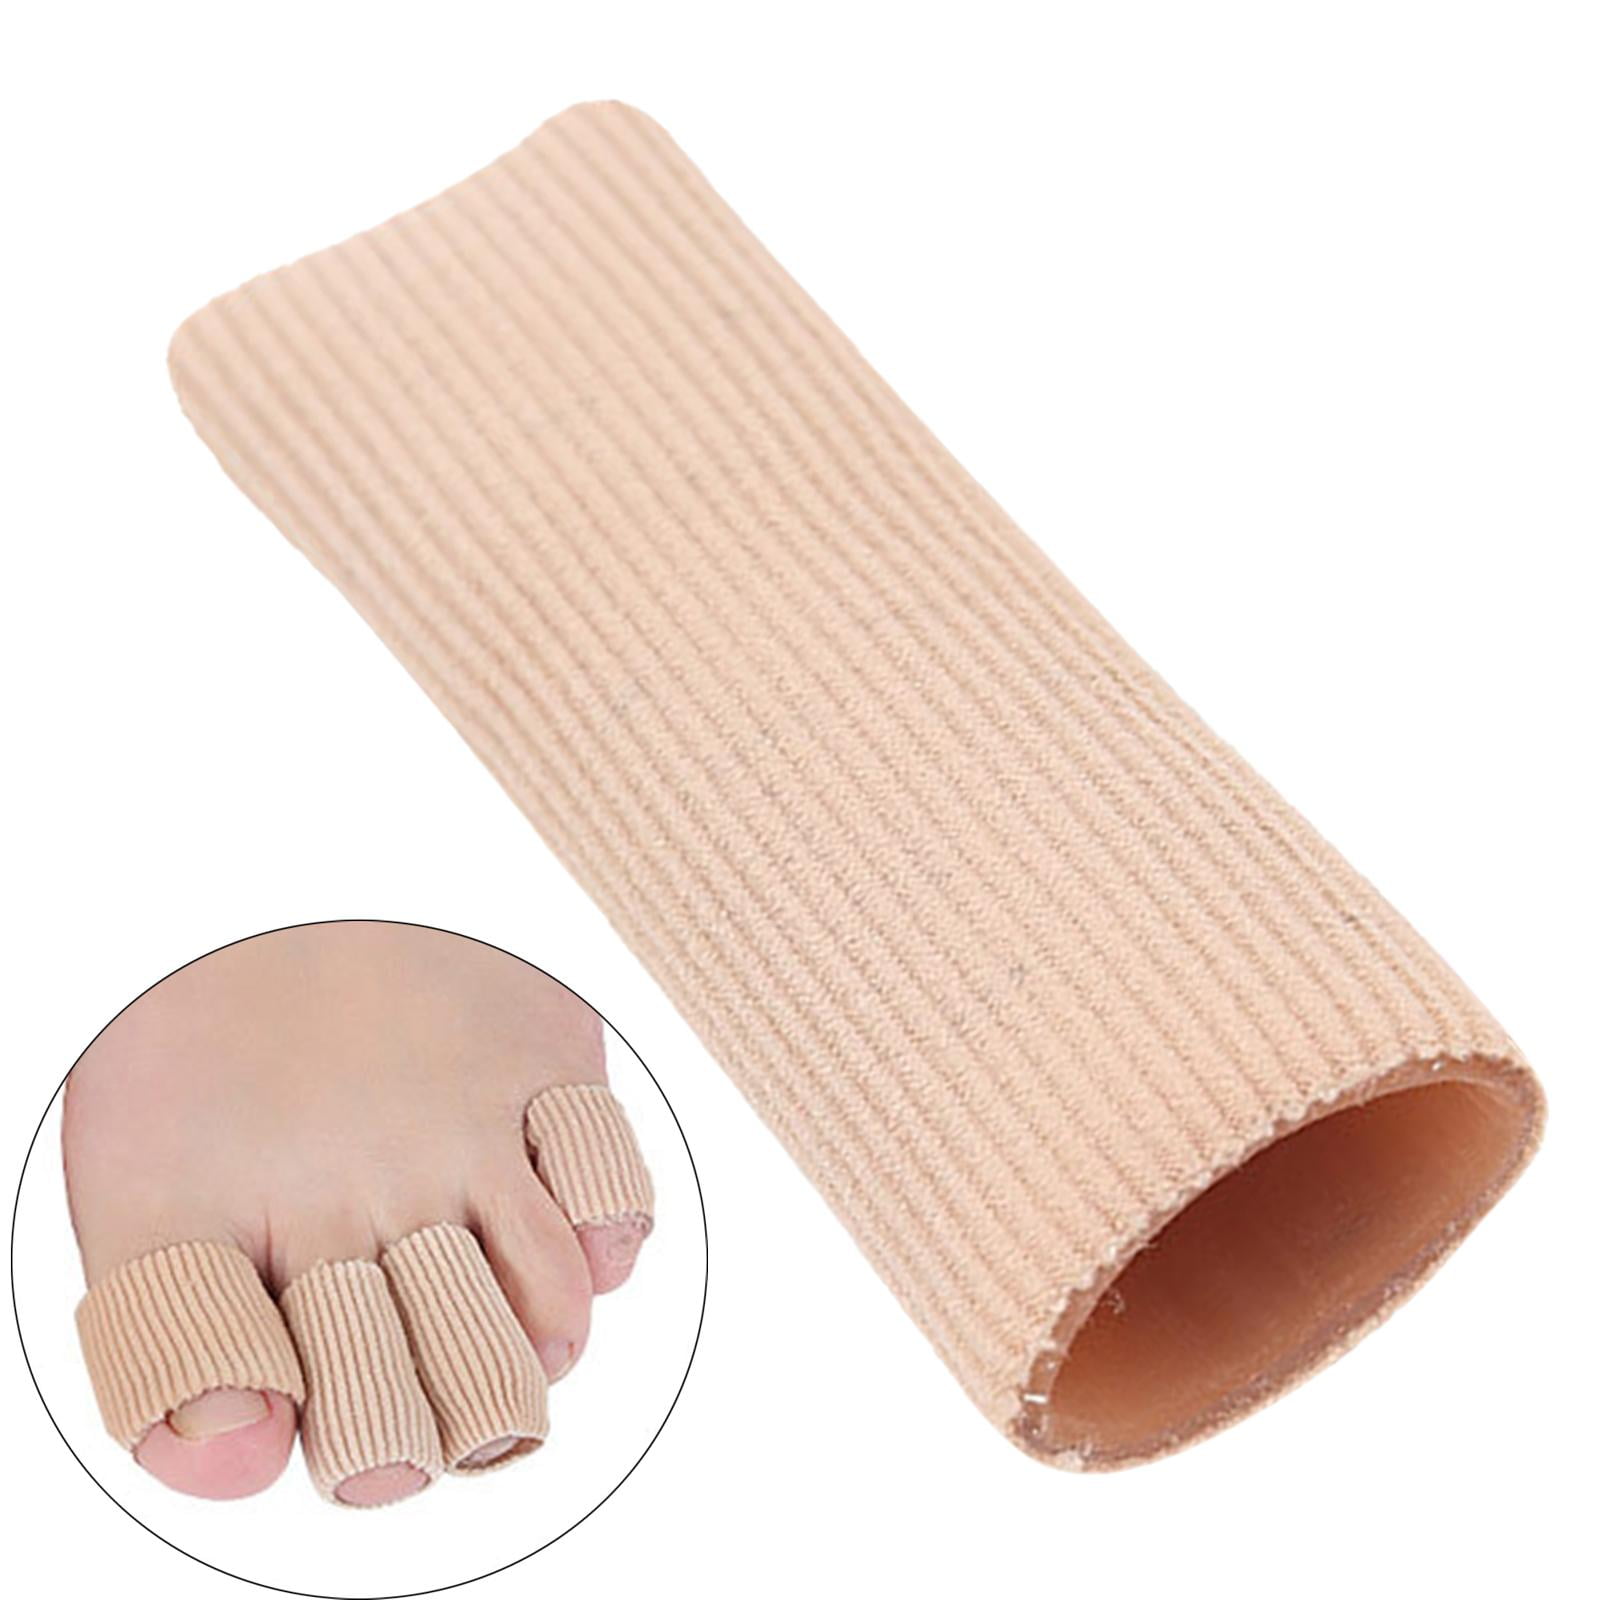 Dropship Fabric Toe Separator Finger Protector Applicator Corn Callus  Remover Bunion Corrector Pedicure Pain Relief Tube Foot Care Tools to Sell  Online at a Lower Price